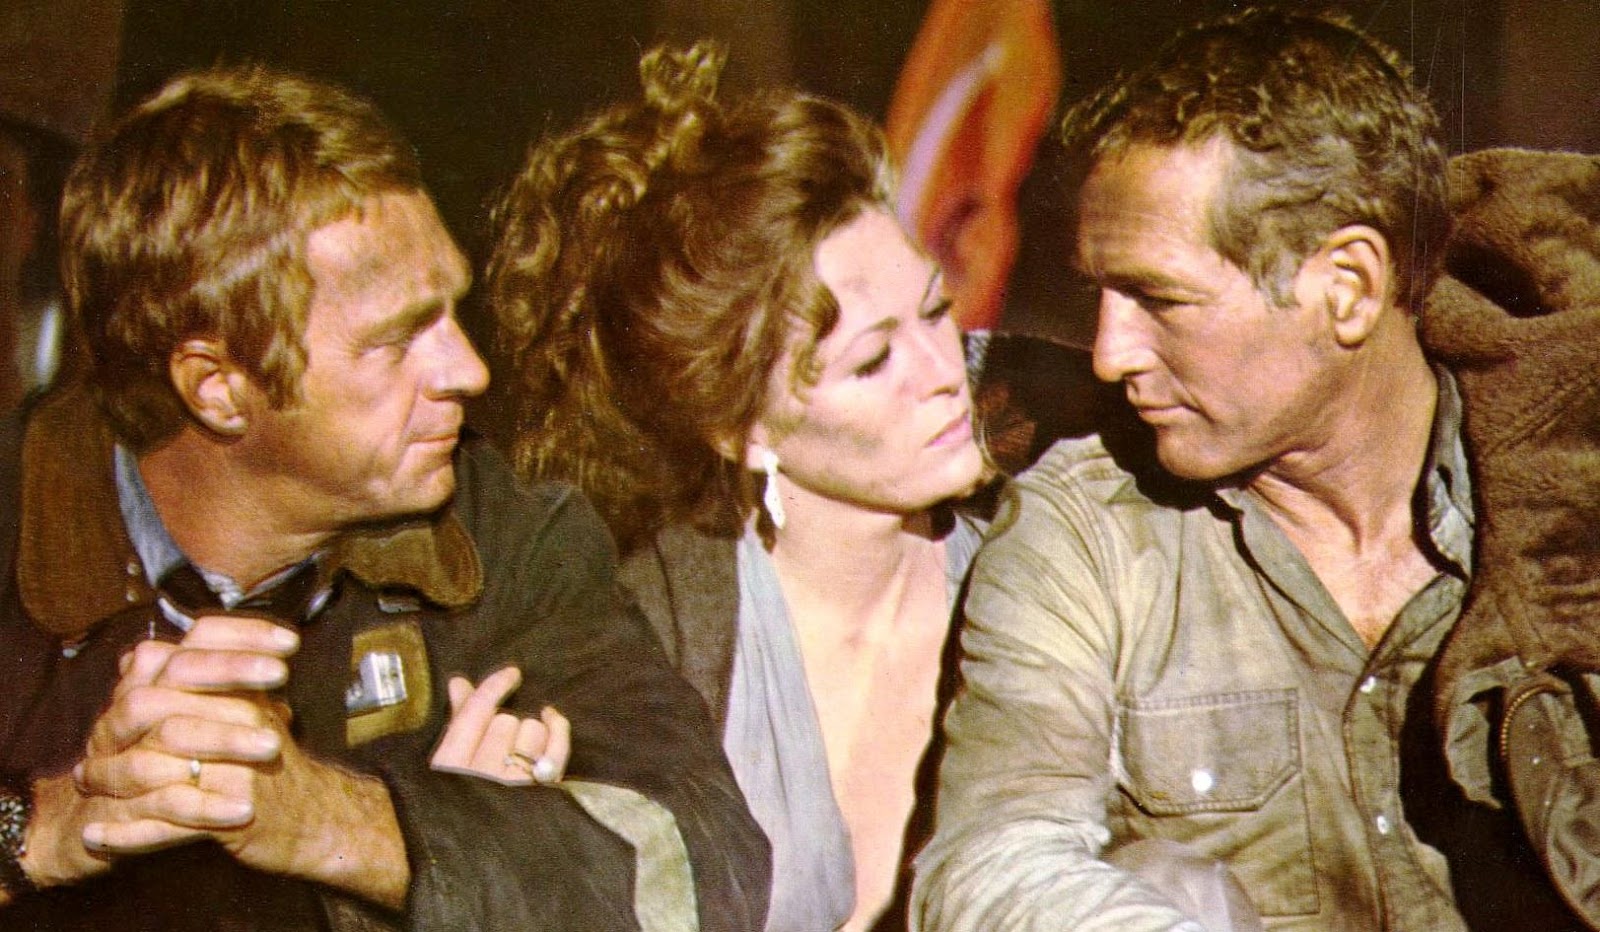 Steve McQueen with Faye Dunaway and Paul Newman.